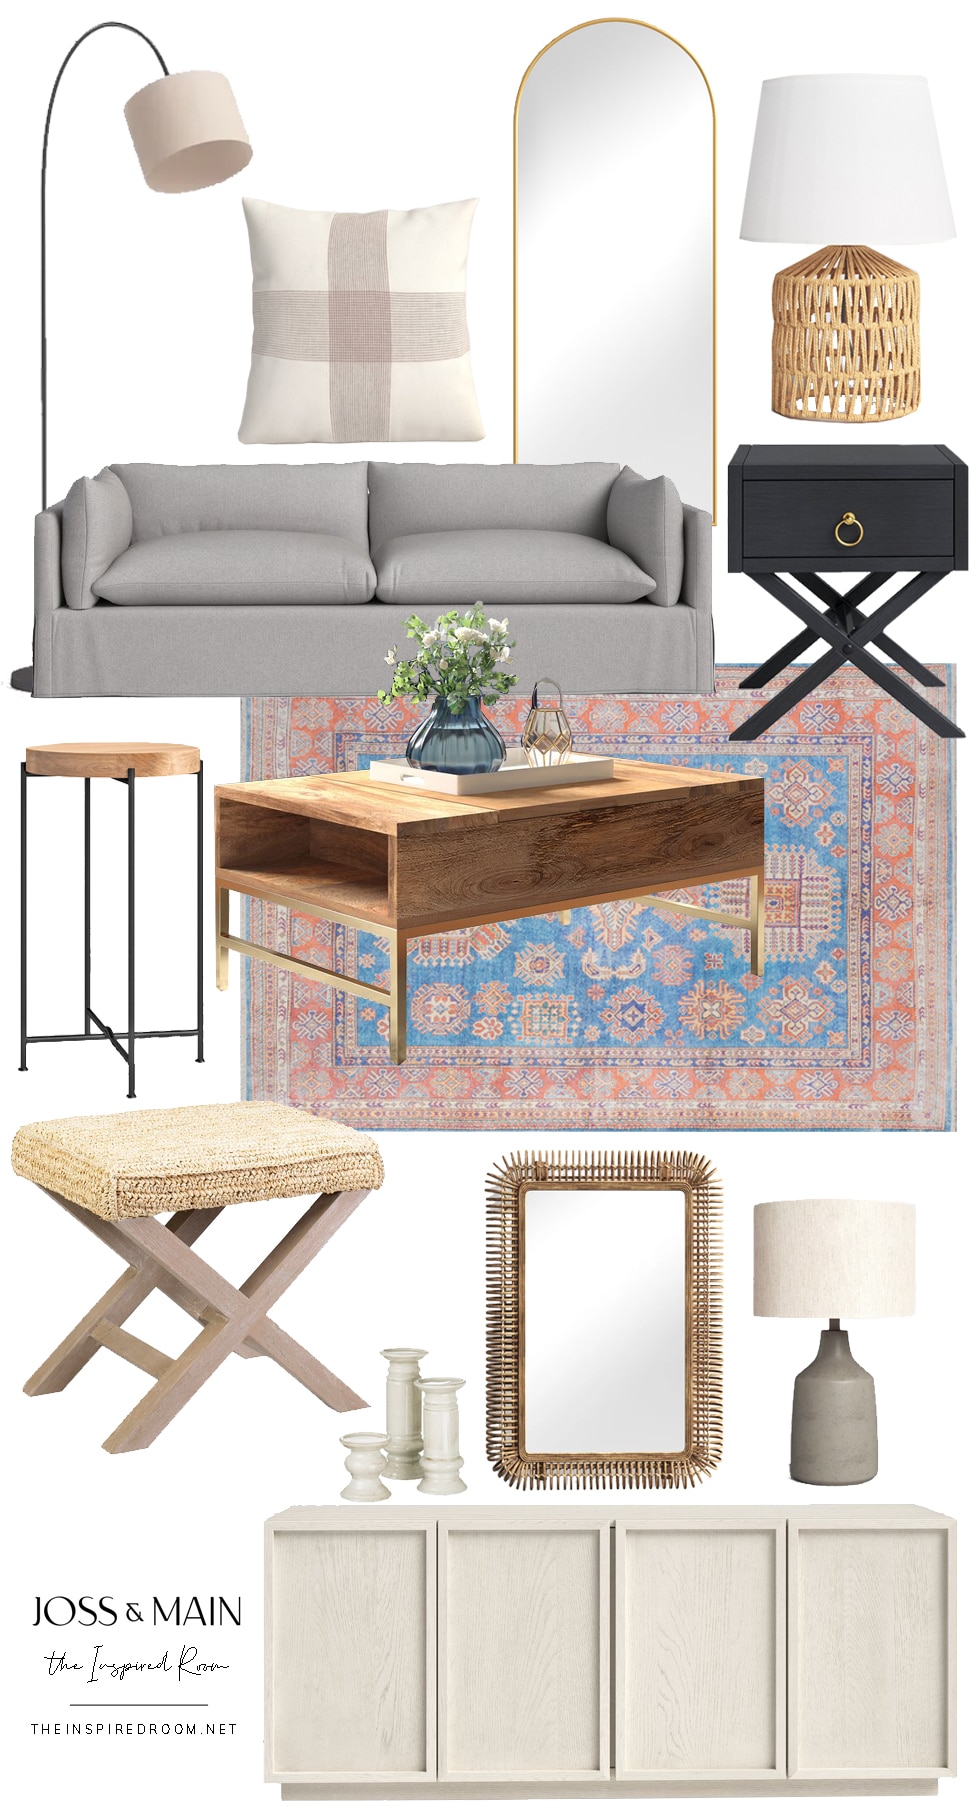 Mixing & Matching Decor to Create Your Own Style (+ Mood Boards)